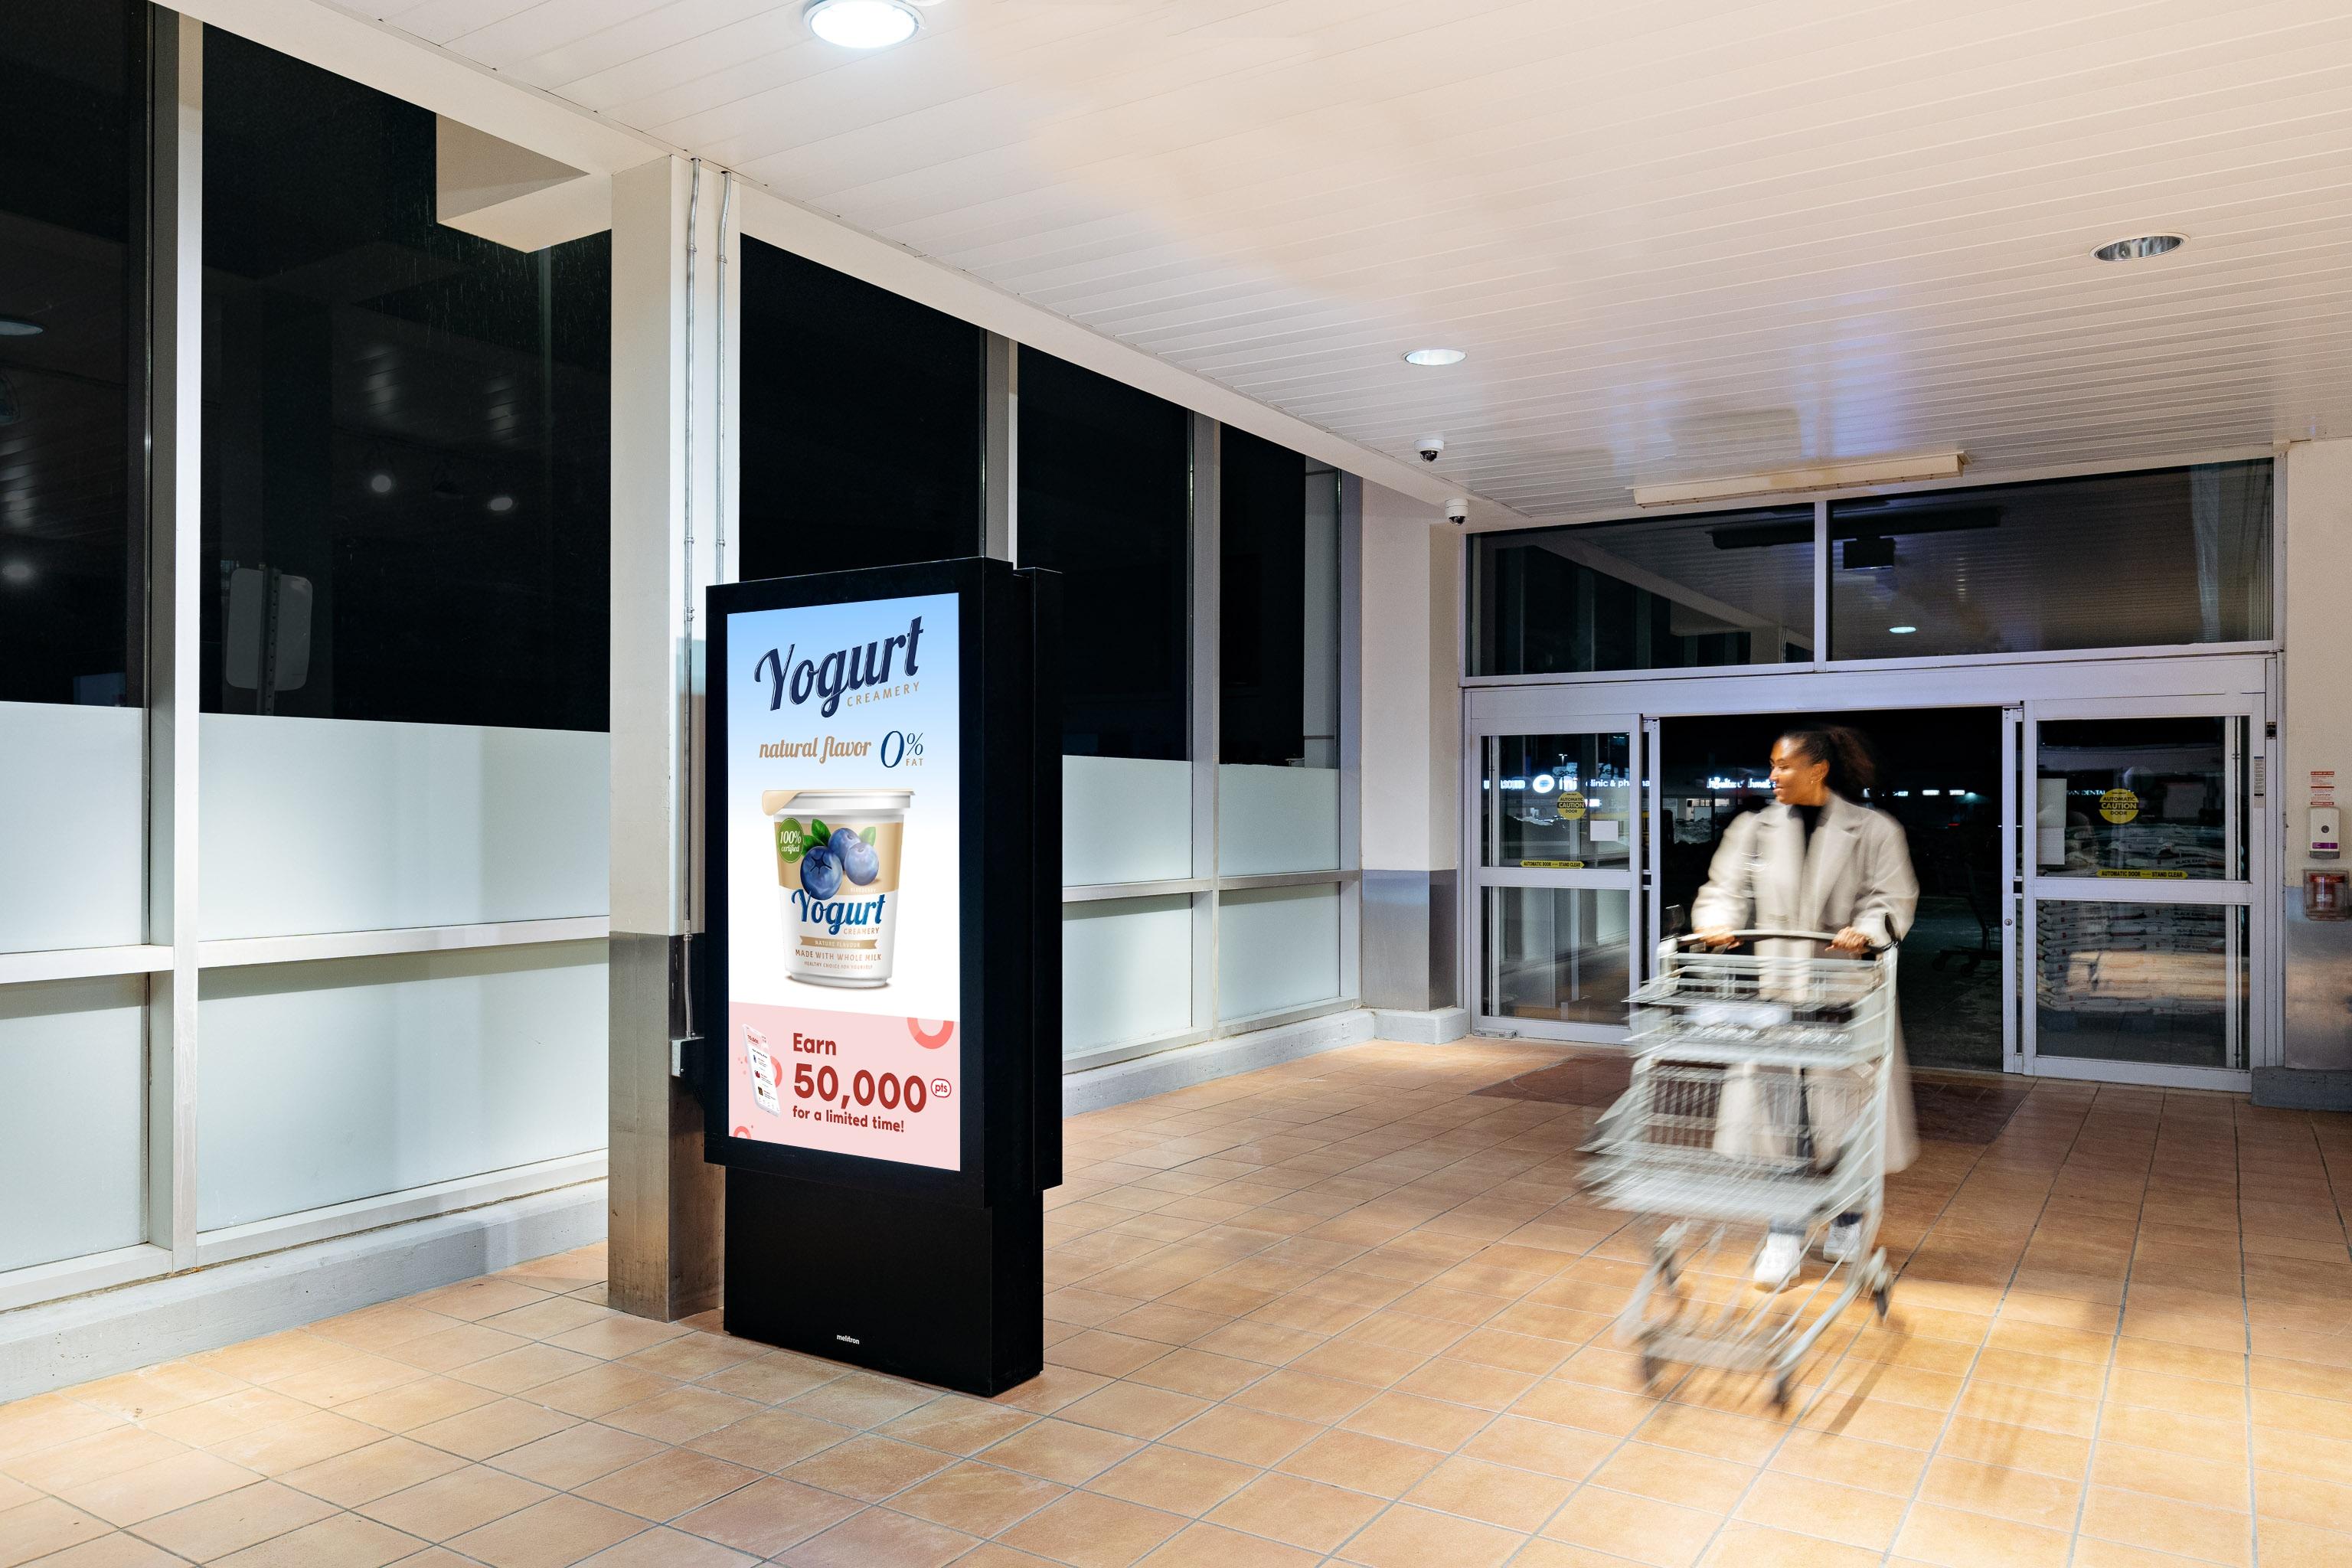 A woman walks by a screen at the front entrance of a grocery store with a yogurt advertisement on it.